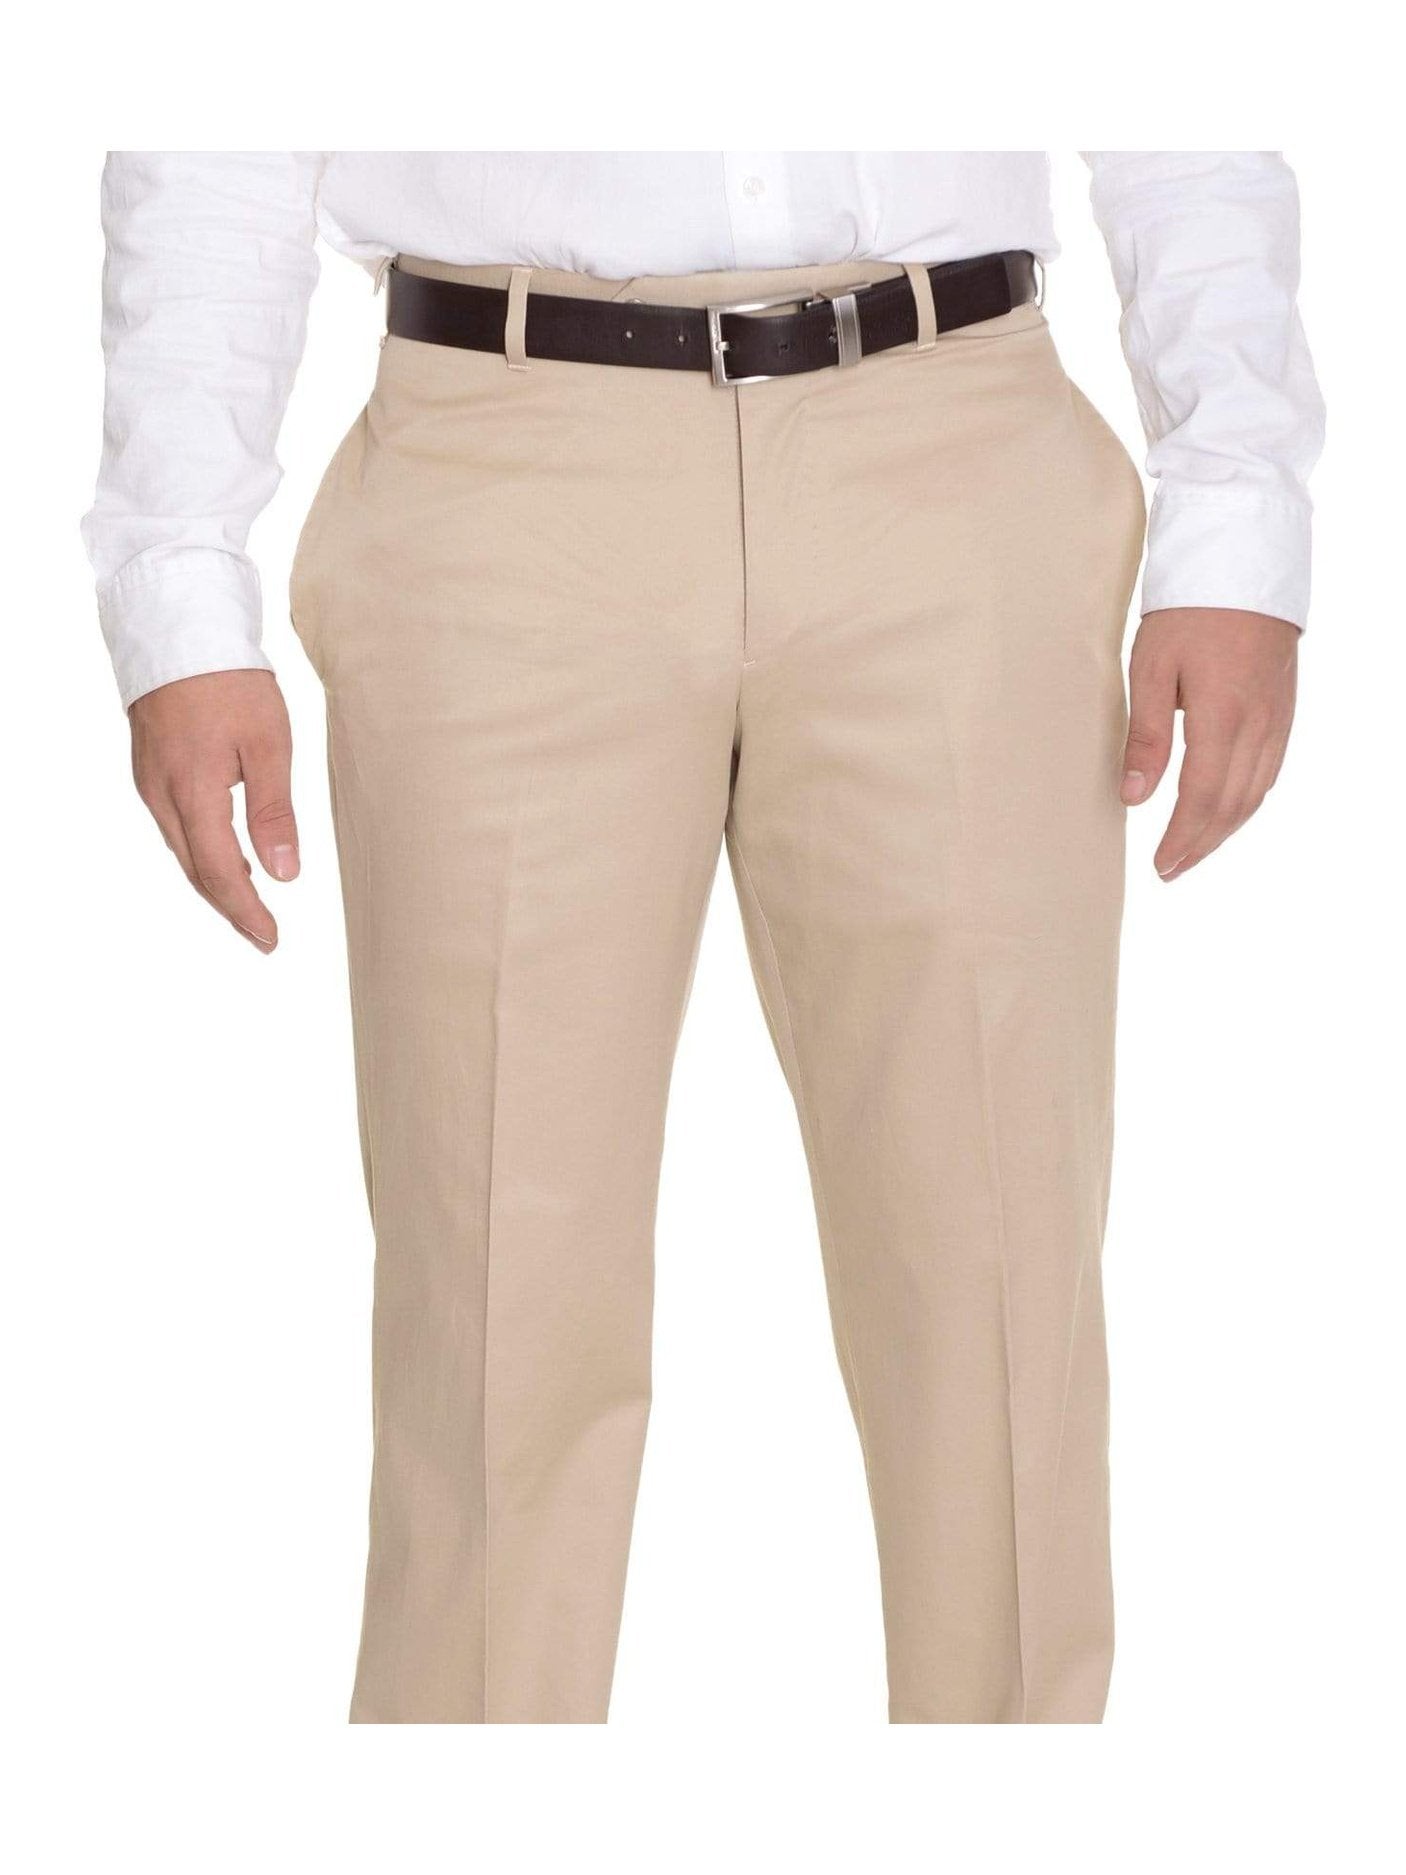 Buy Stylish Womens / Girls Regular fit Cotton pants, Trousers pants with  side pocket Online In India At Discounted Prices